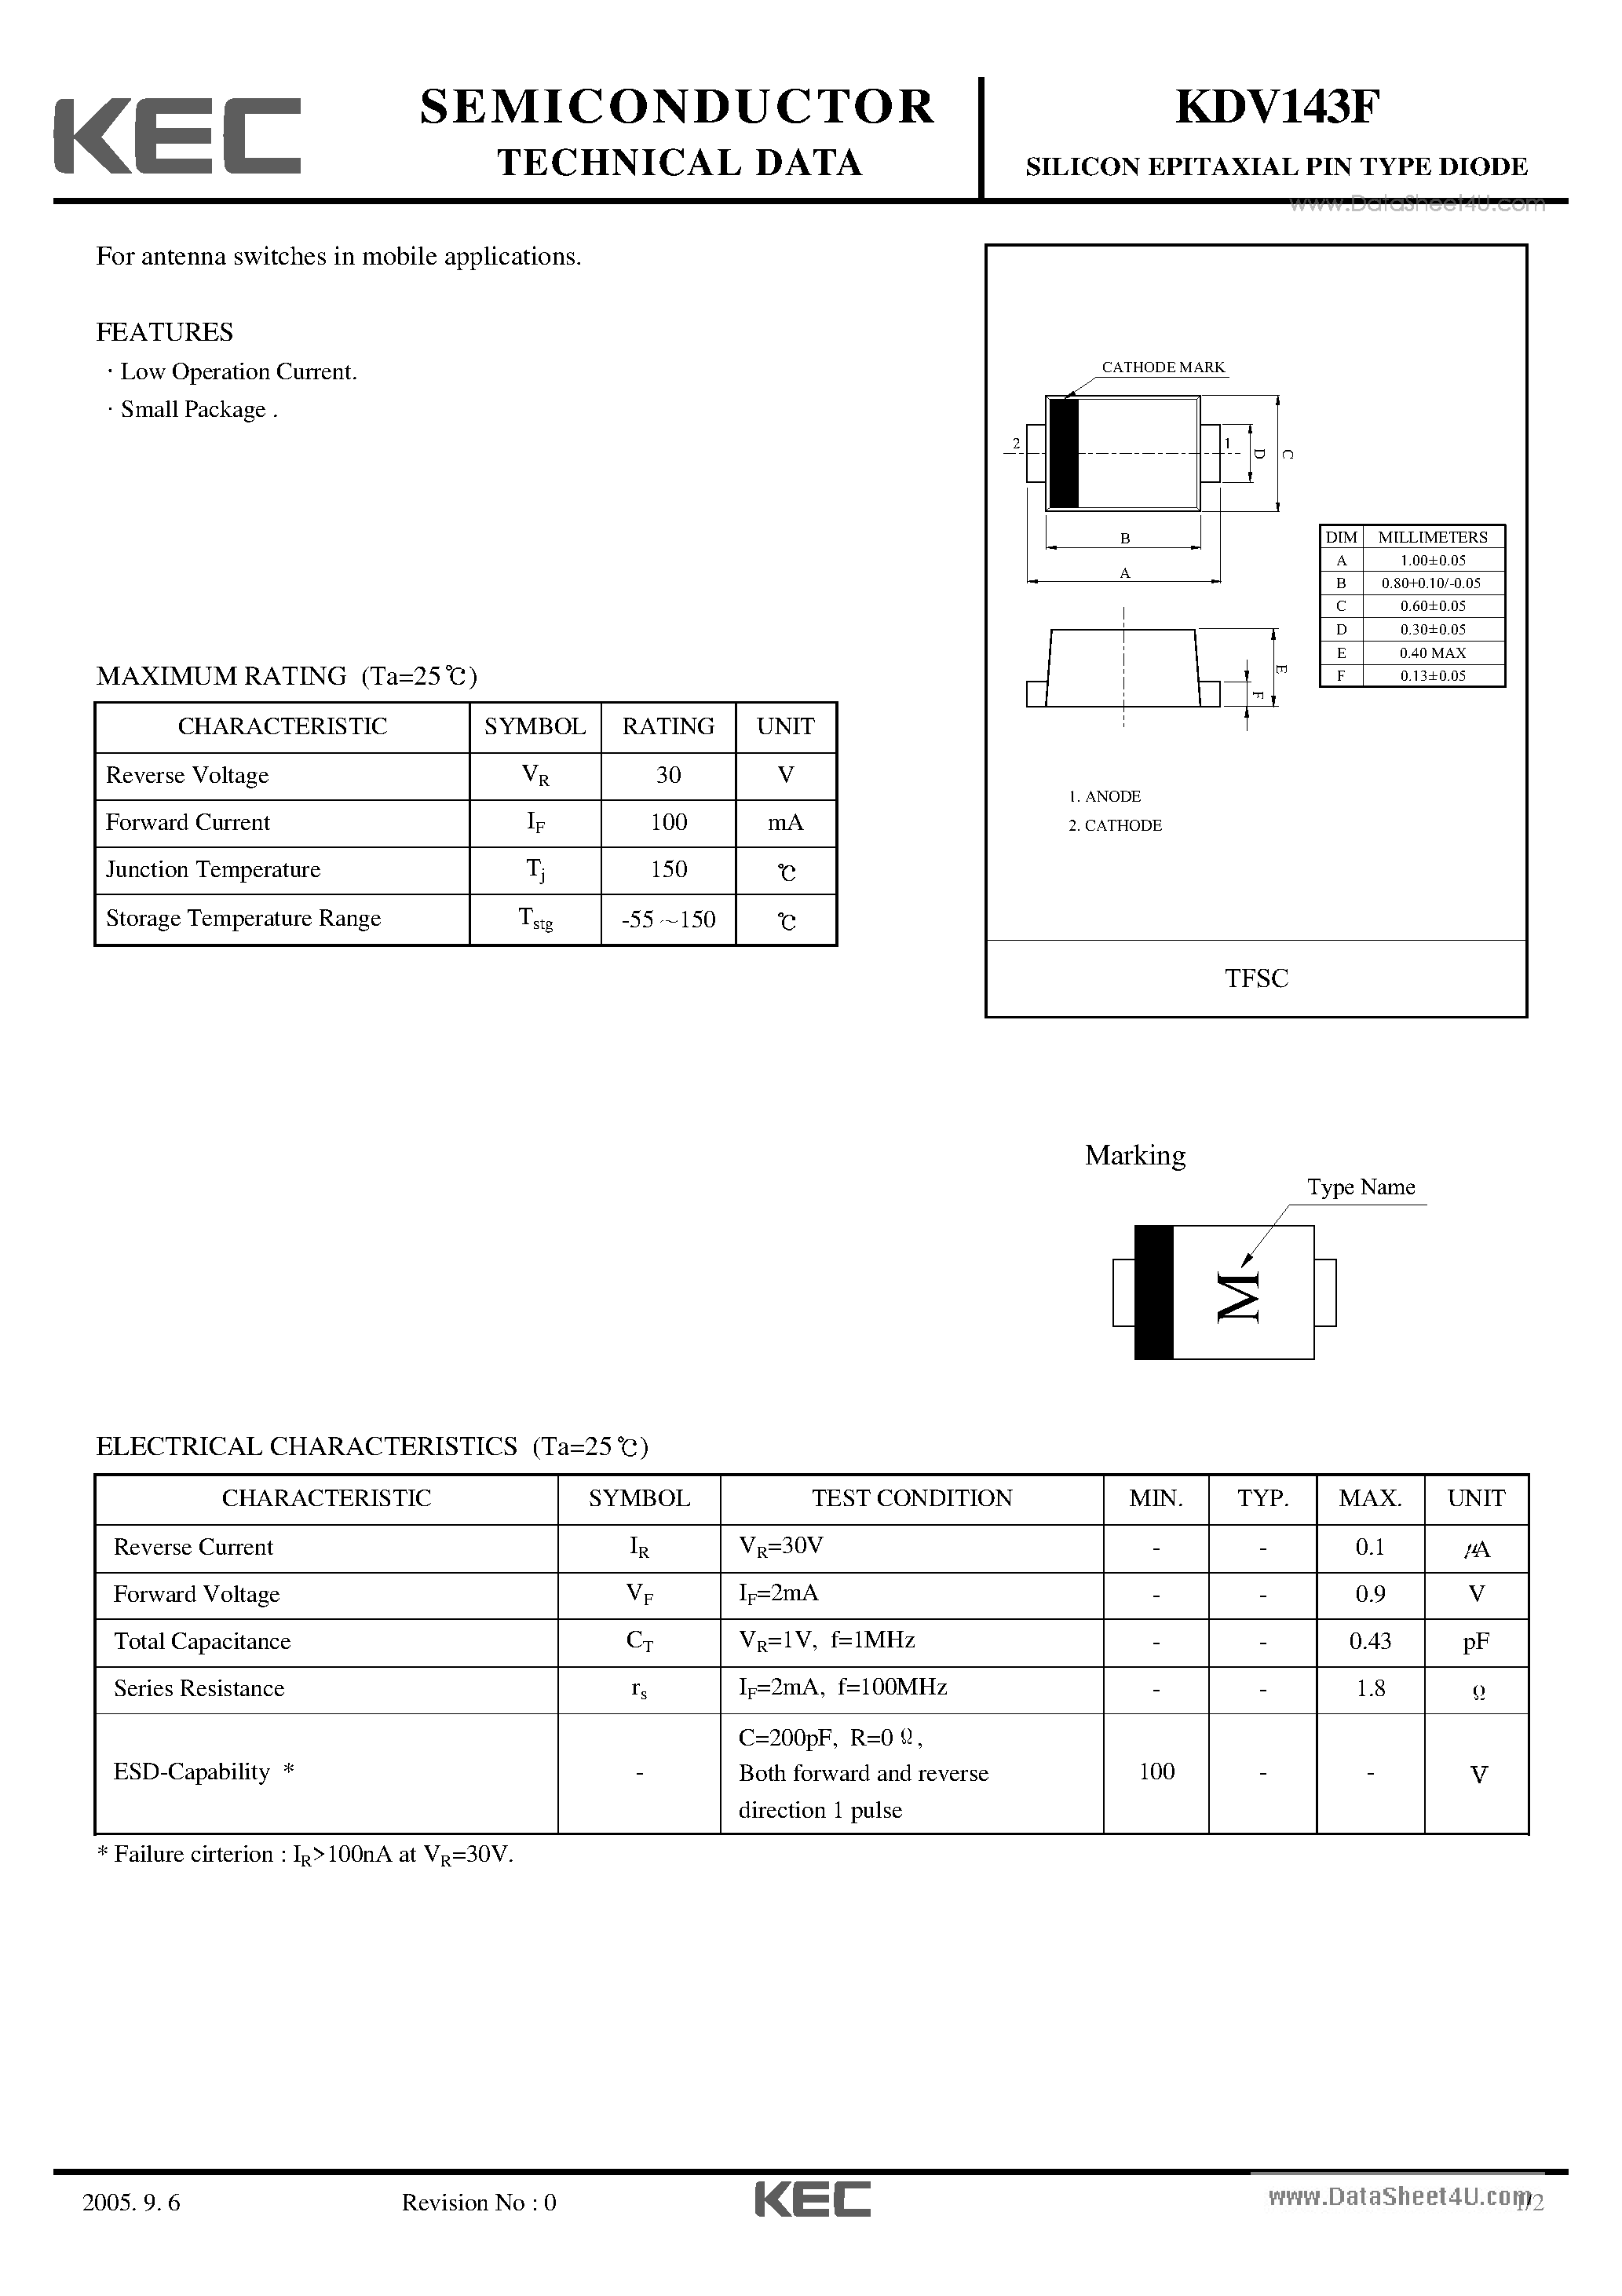 Datasheet KDV143F - For antenna switches page 1